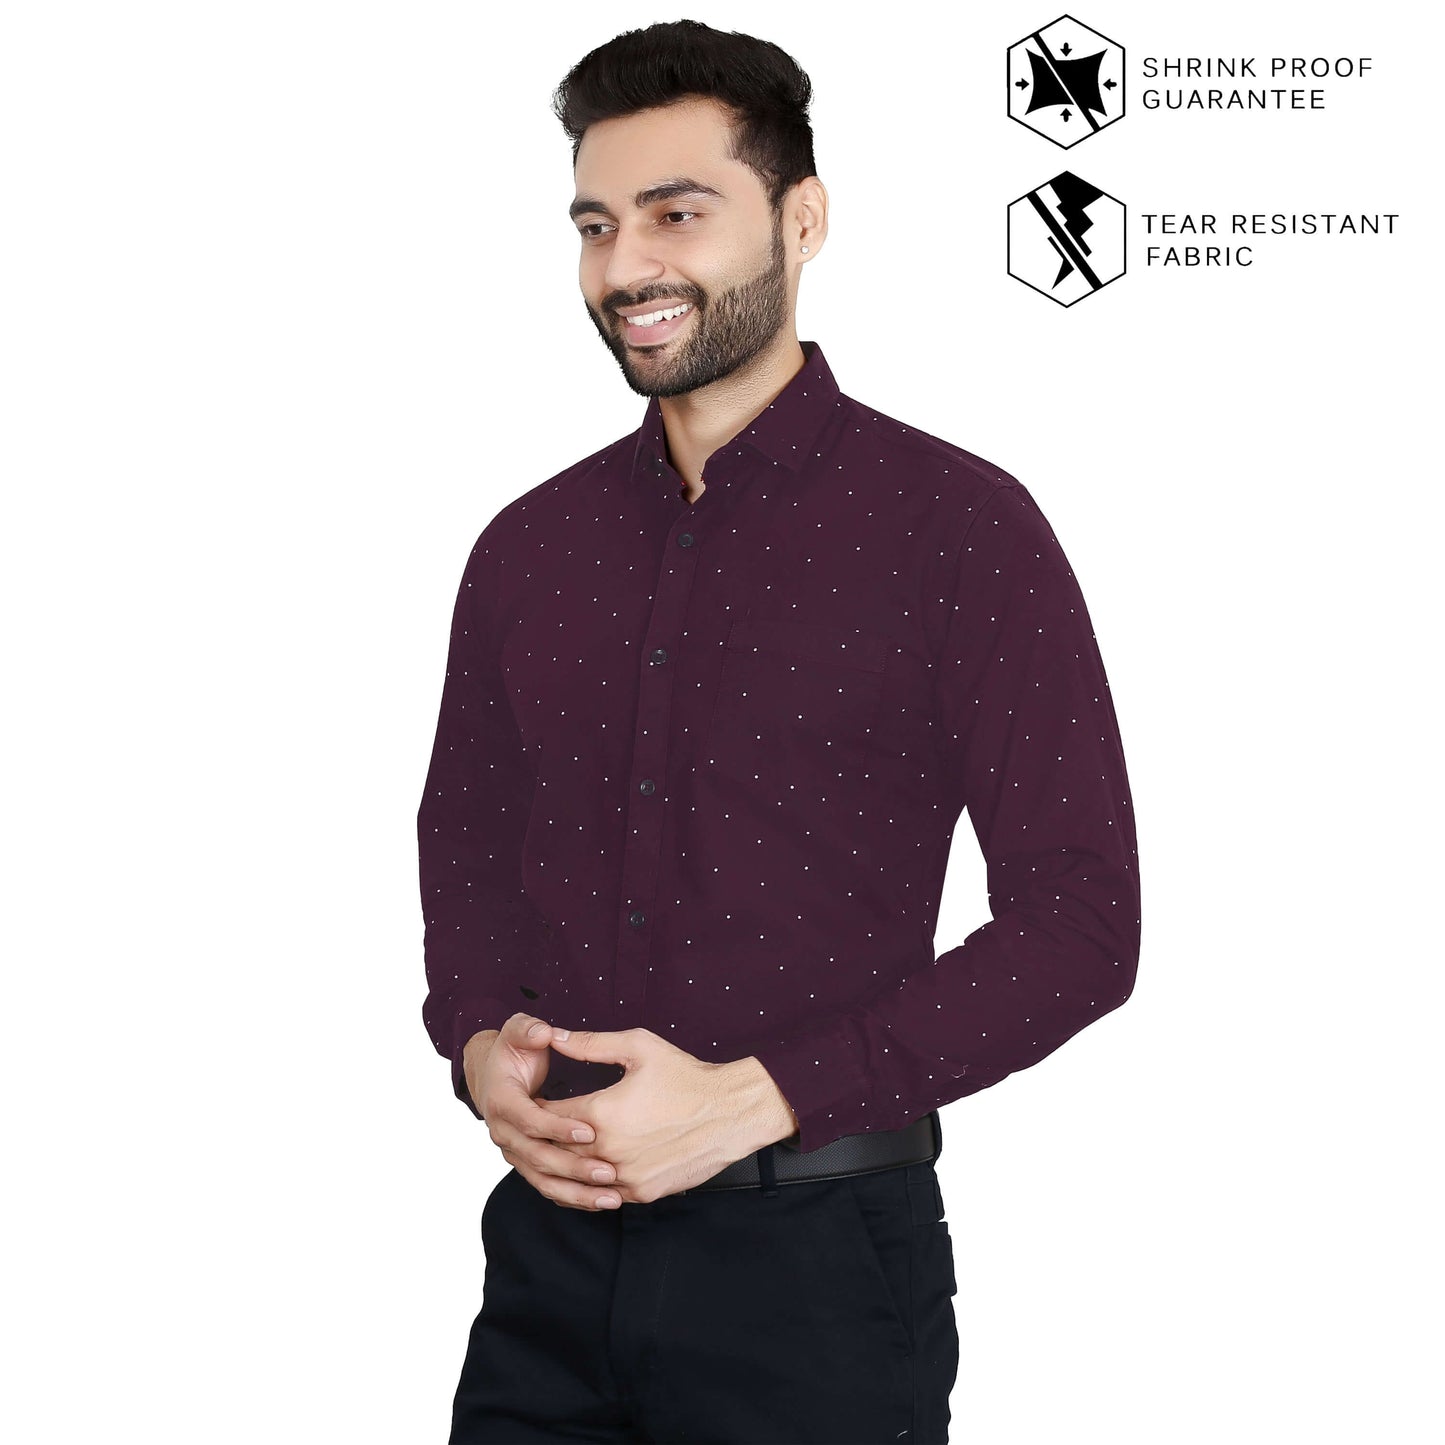 5thanfold Men's Formal Pure Cotton Full Sleeve Printed Maroon Slim Fit Shirt